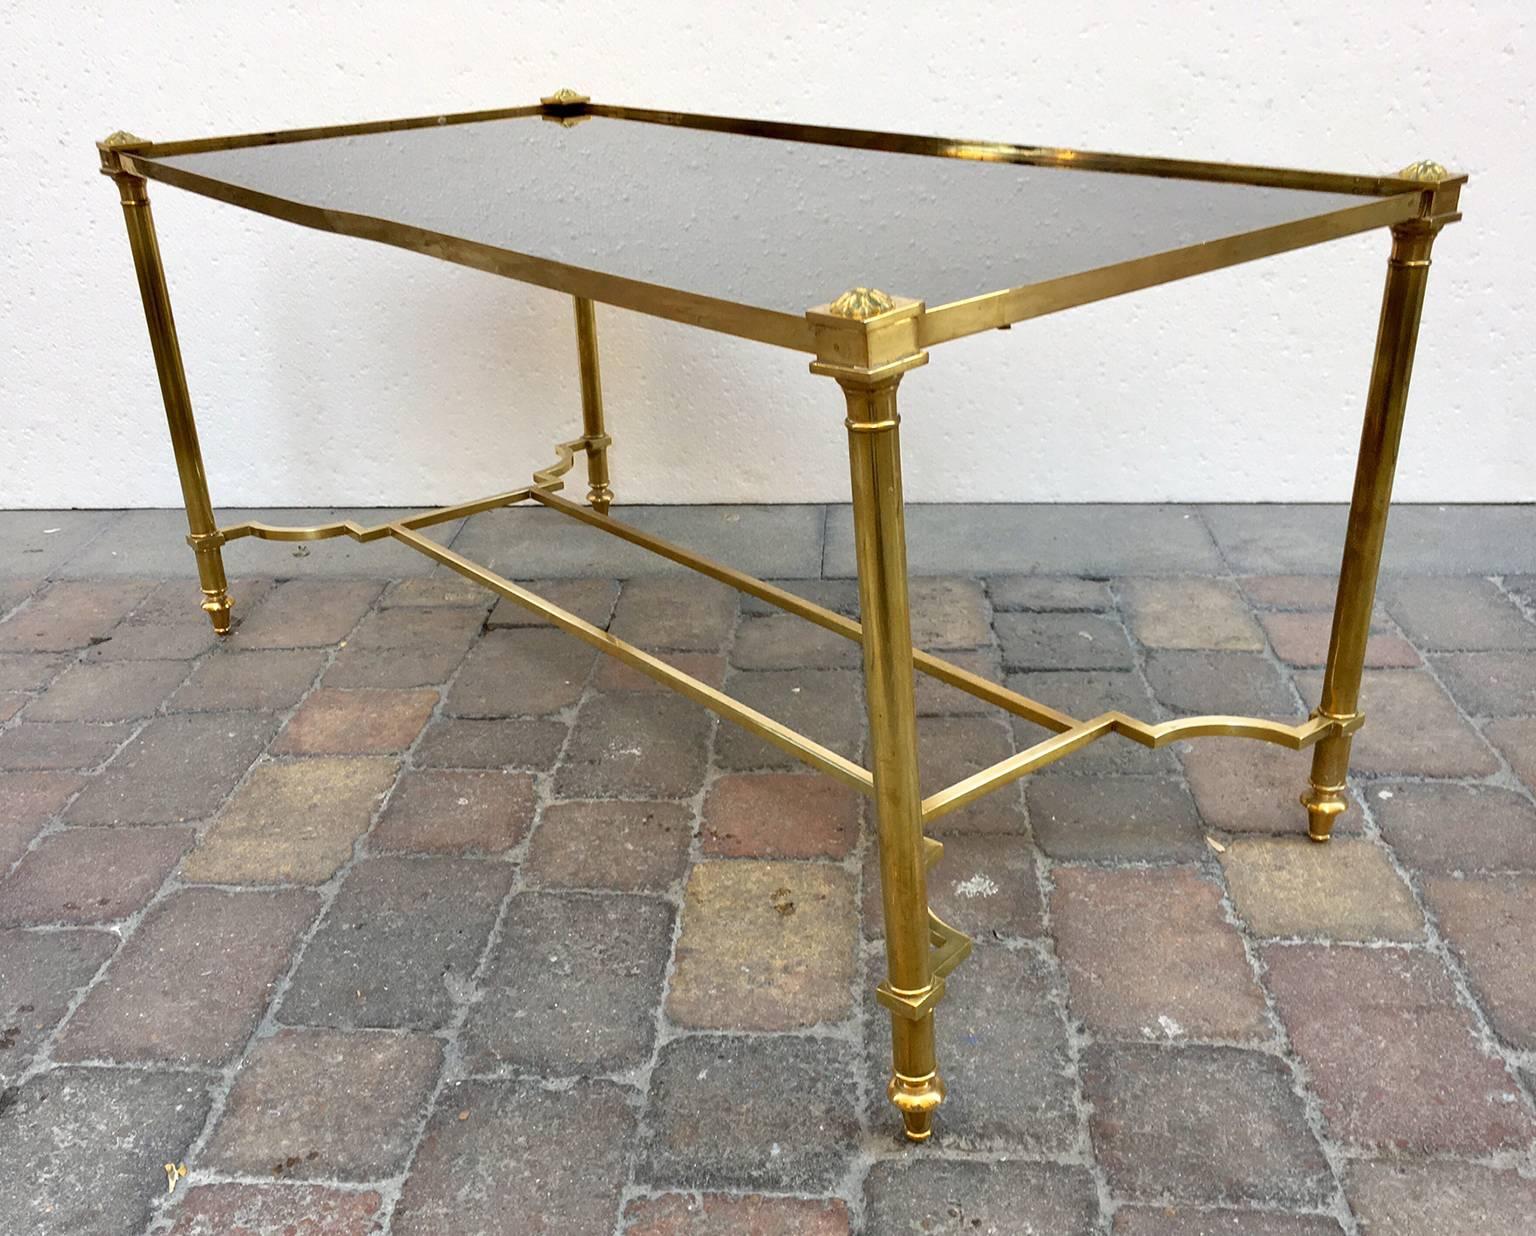 Eegant cocktail table, made in golden laron with black glass top, Maison Jansen style